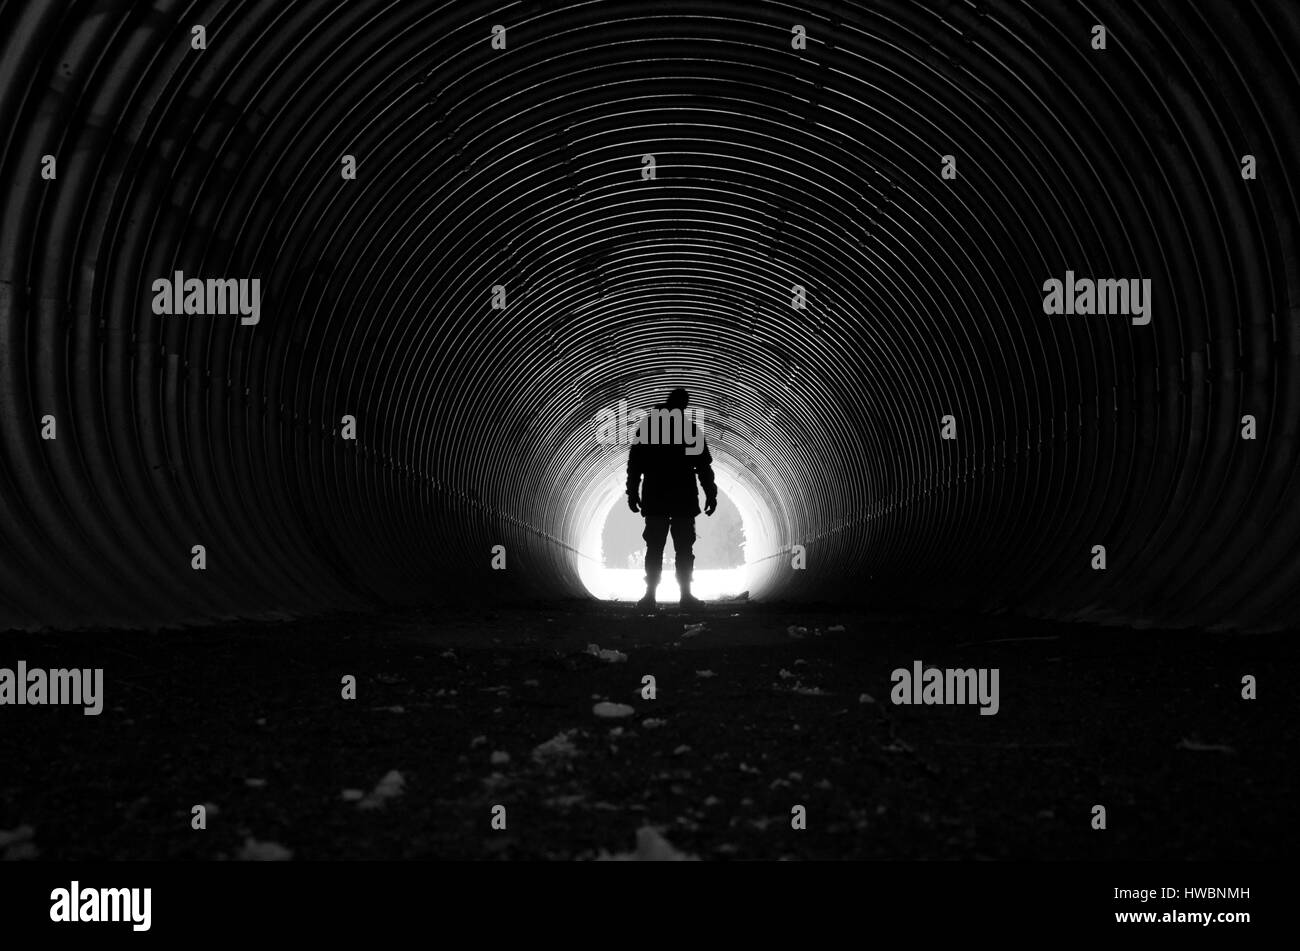 Human standing in dark tunnel with light at other end. Beautiful, mystical and poetic black and white photo. Calm and peaceful mood. Stock Photo